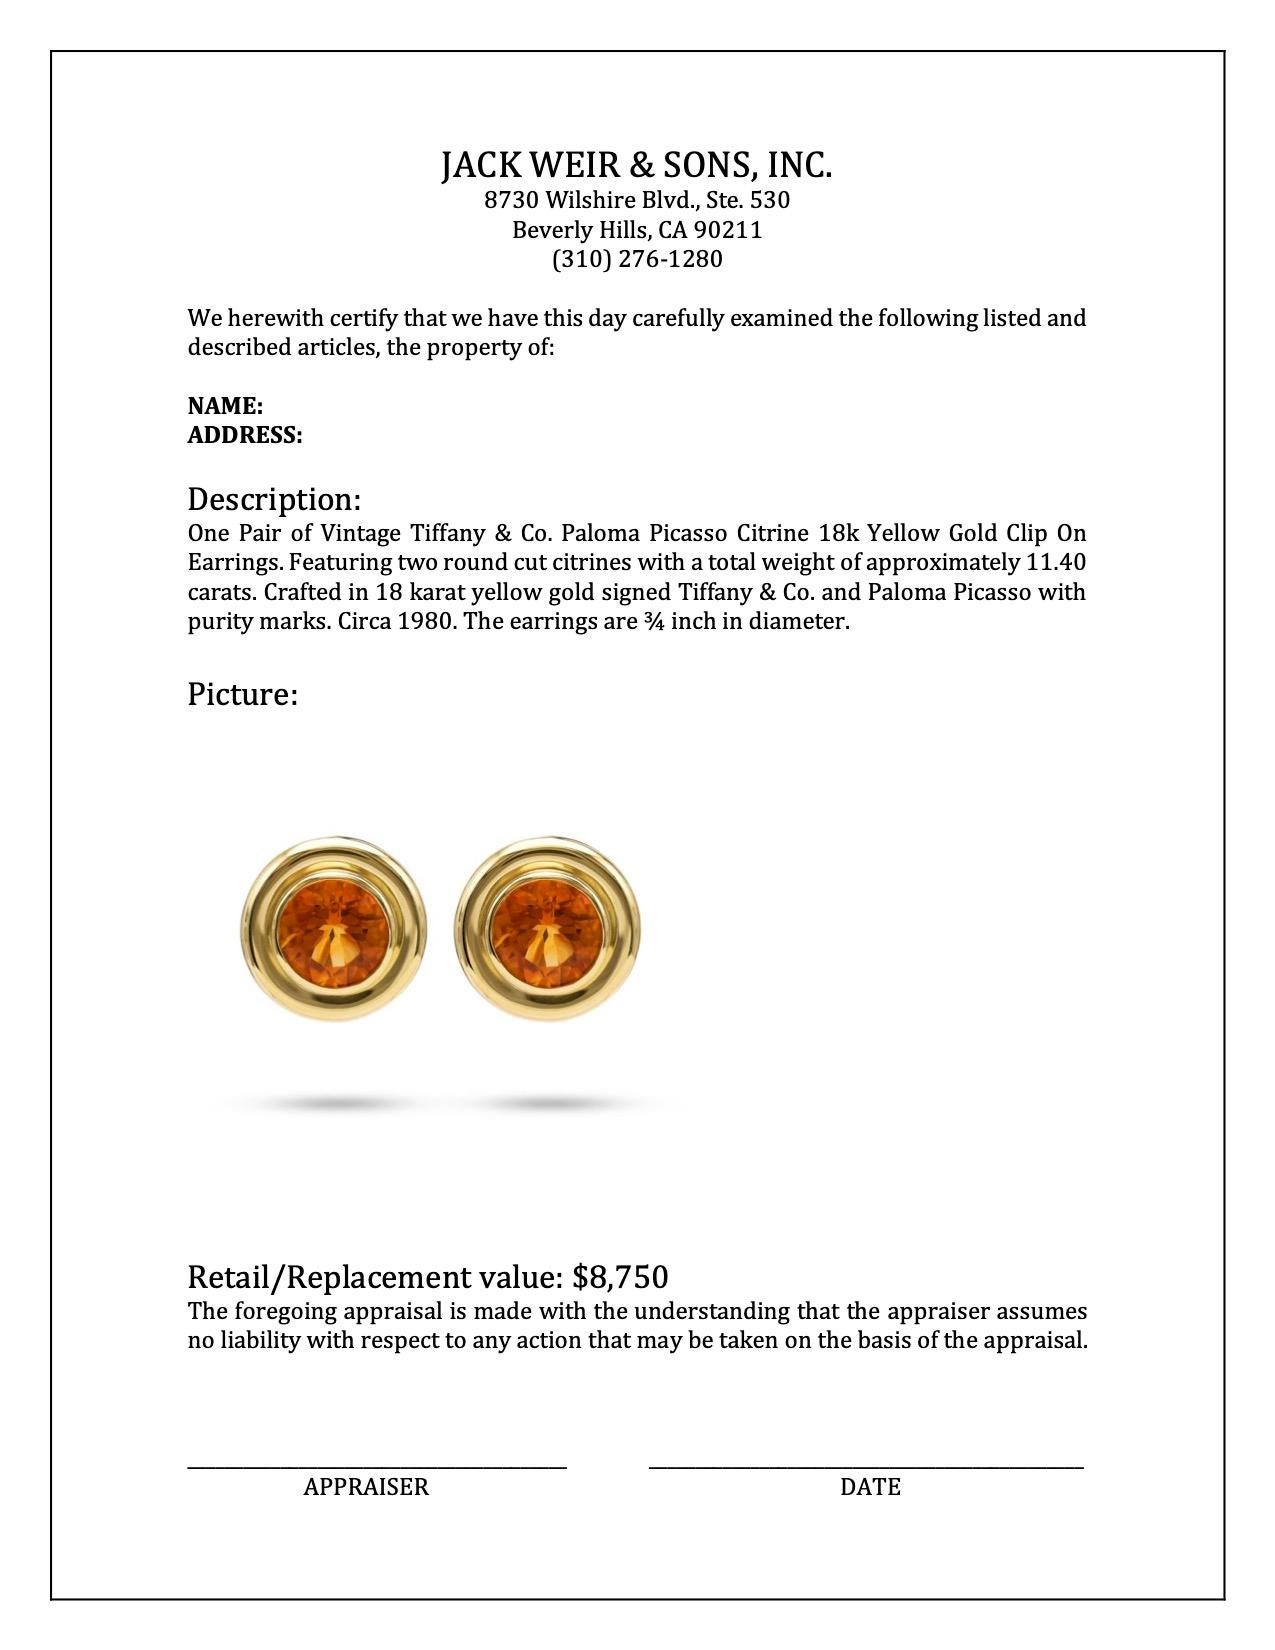 Women's or Men's Vintage Tiffany & Co. Paloma Picasso Citrine 18k Yellow Gold Clip On Earrings For Sale